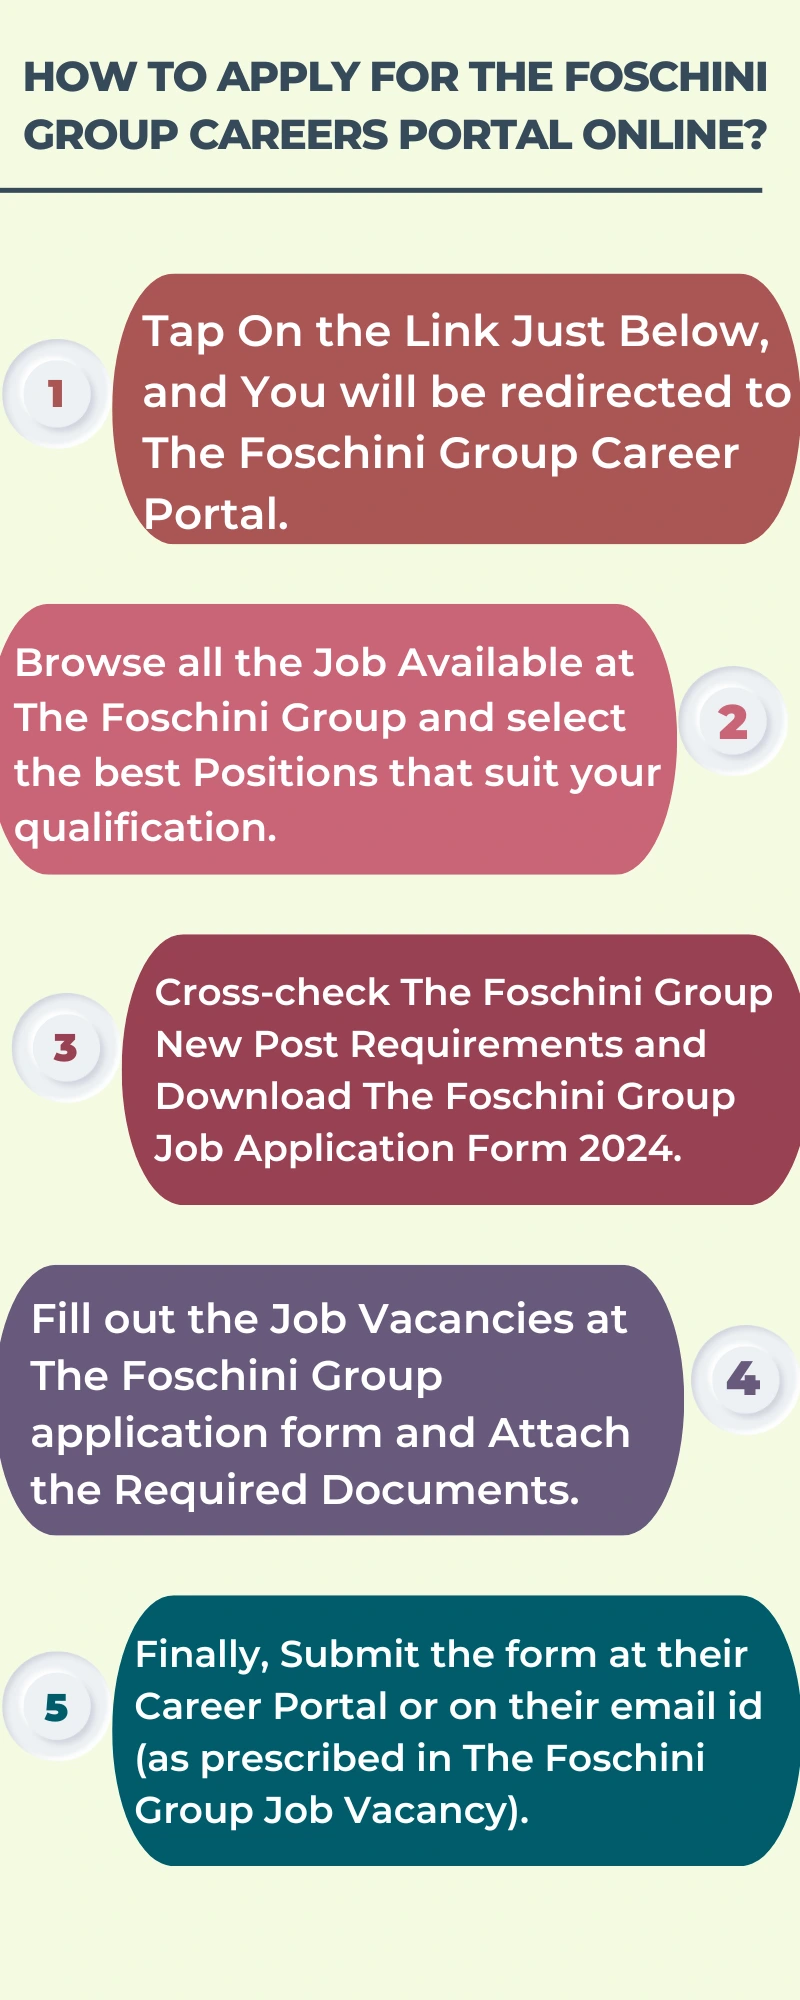 How To Apply for The Foschini Group Careers Portal Online?